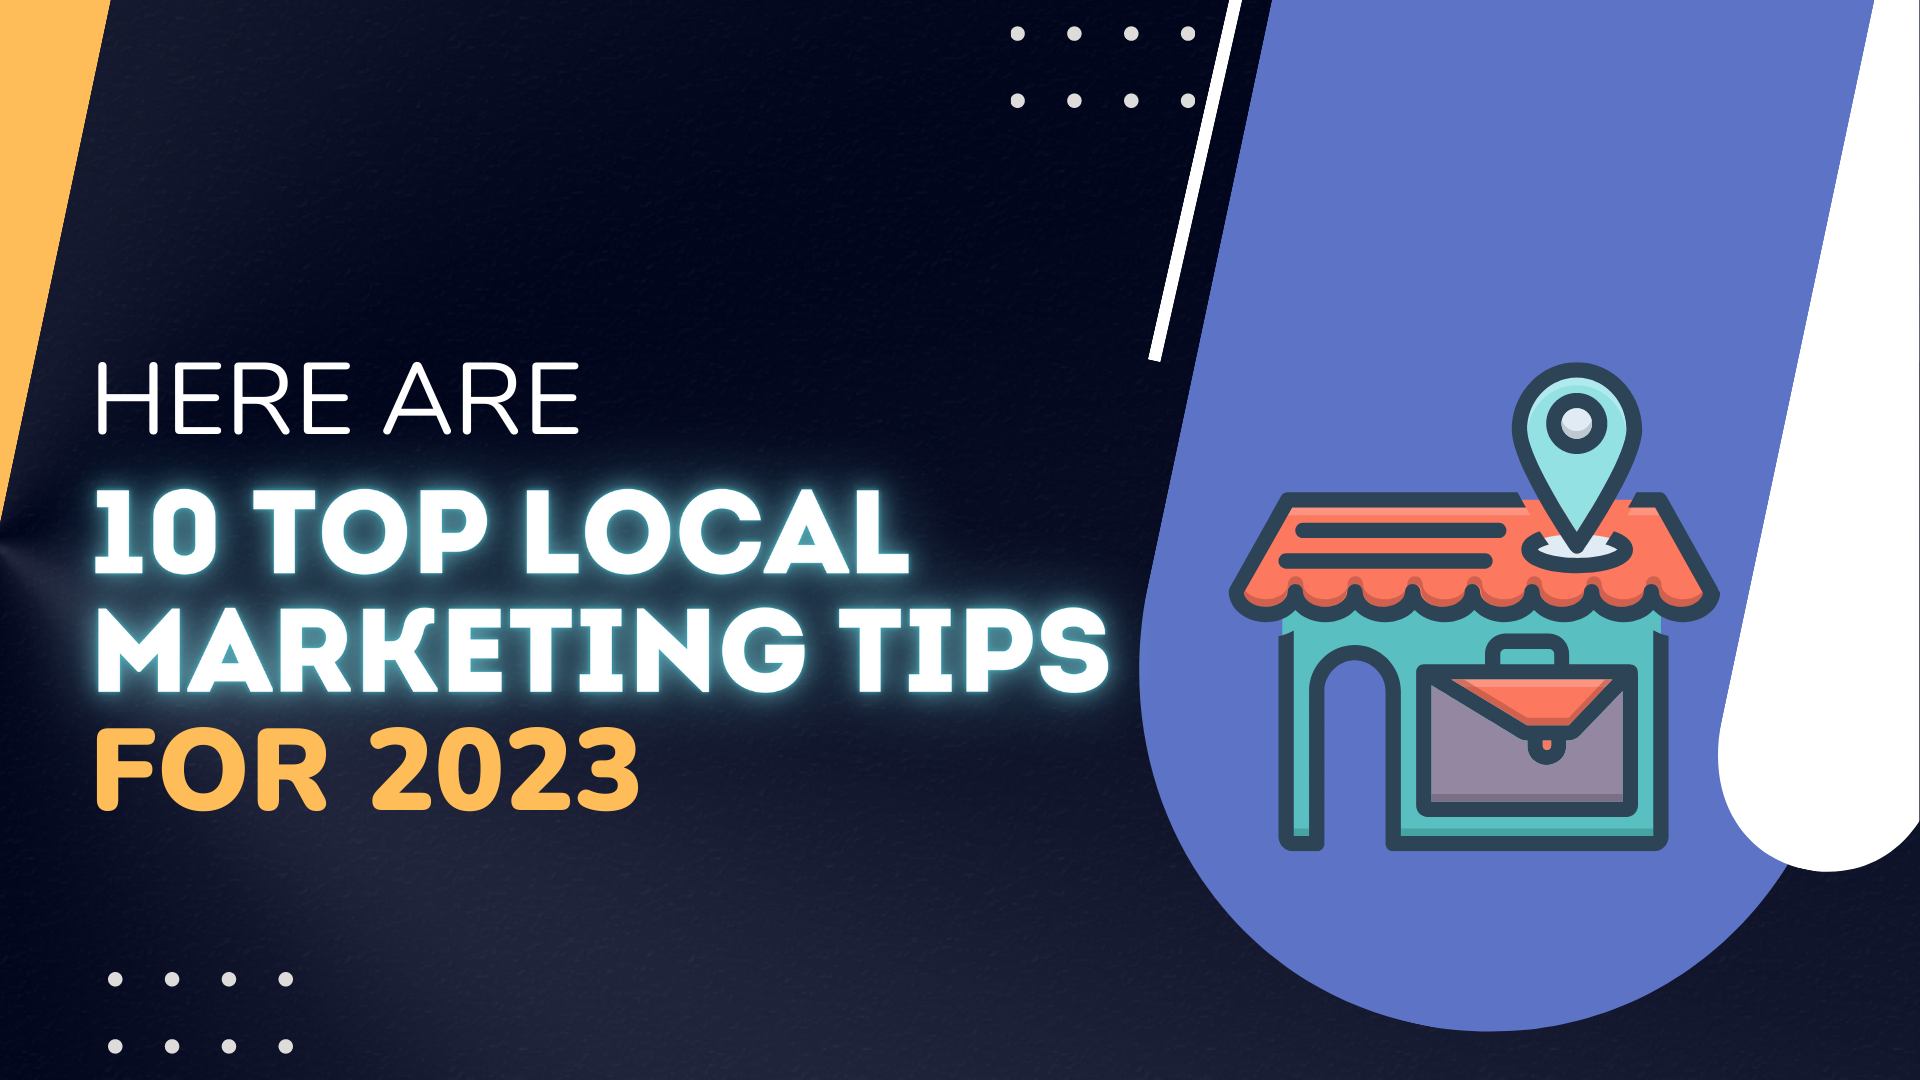 Here are 10 Top Local Marketing Tips for 2023